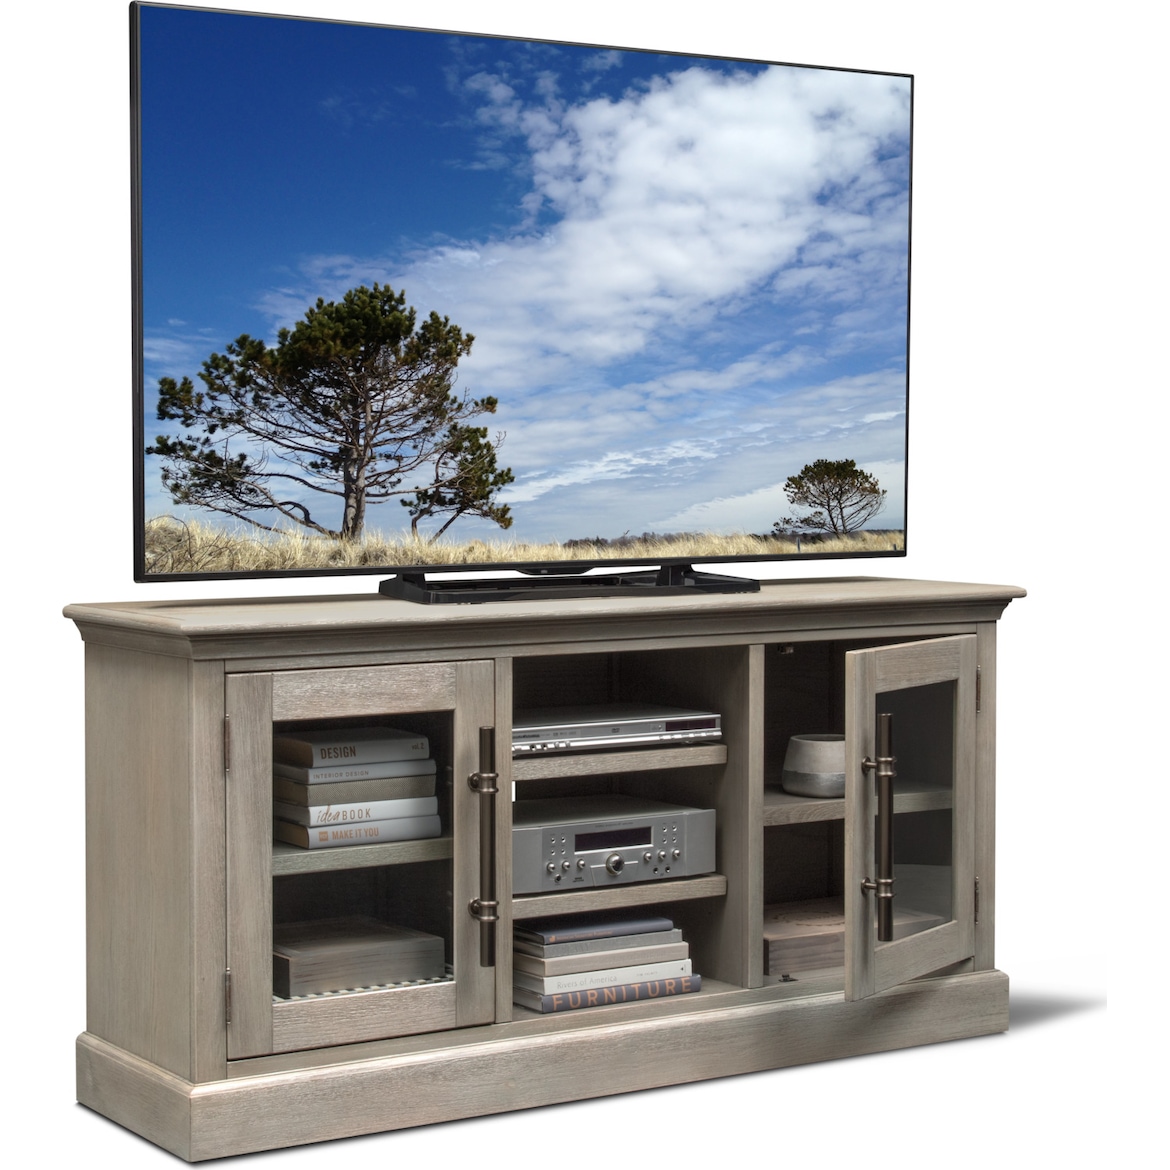 Telluride TV Stand | Value City Furniture and Mattresses